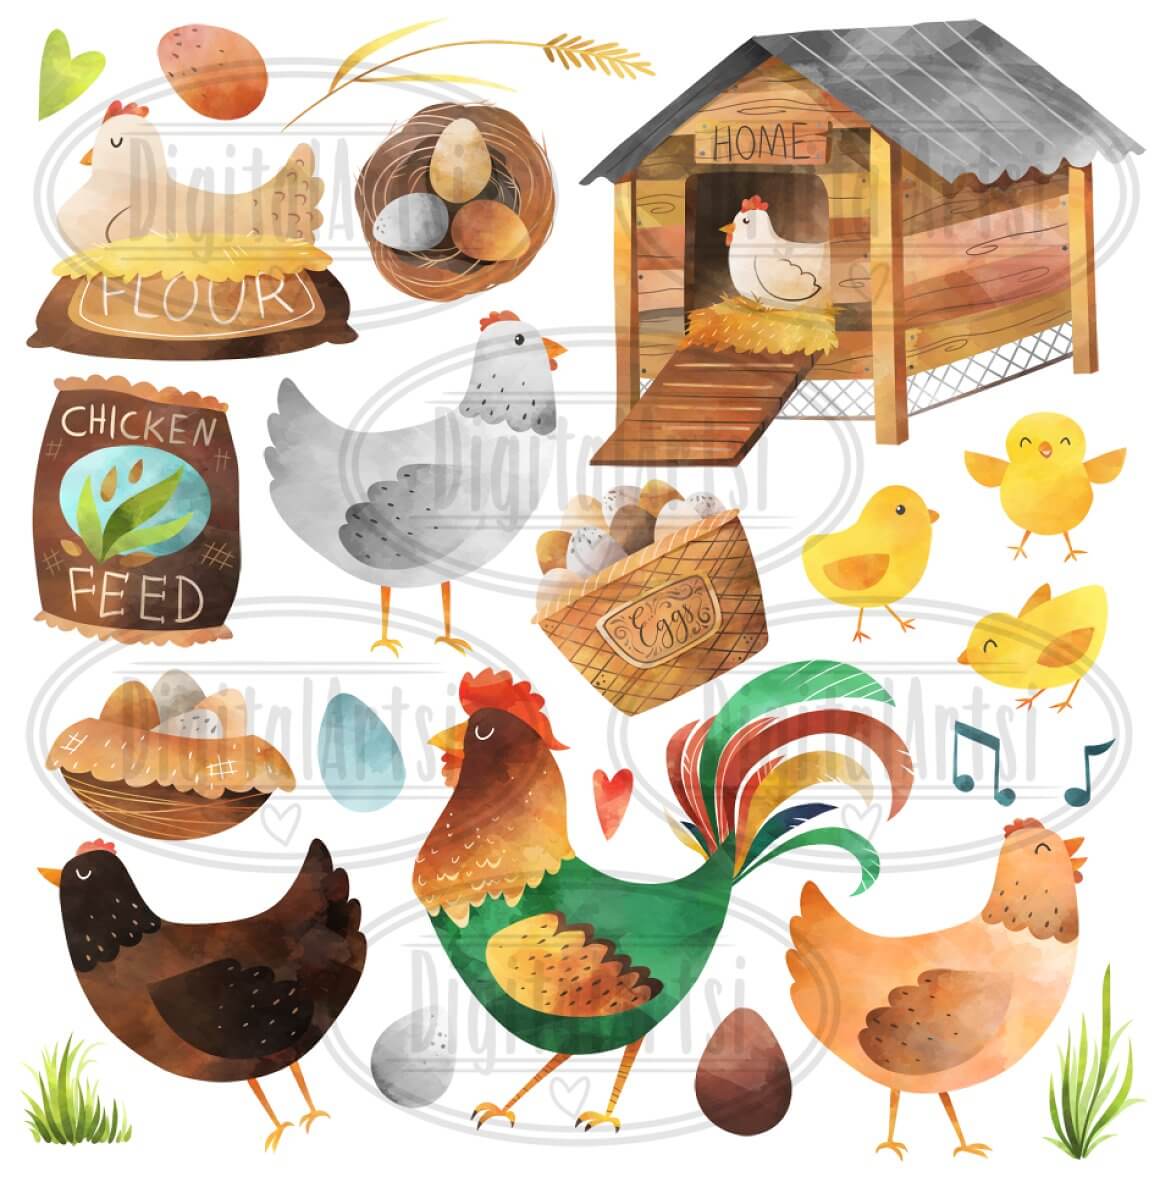 Image of a rooster with green and gold feathers, yellow chickens and joyful hens.